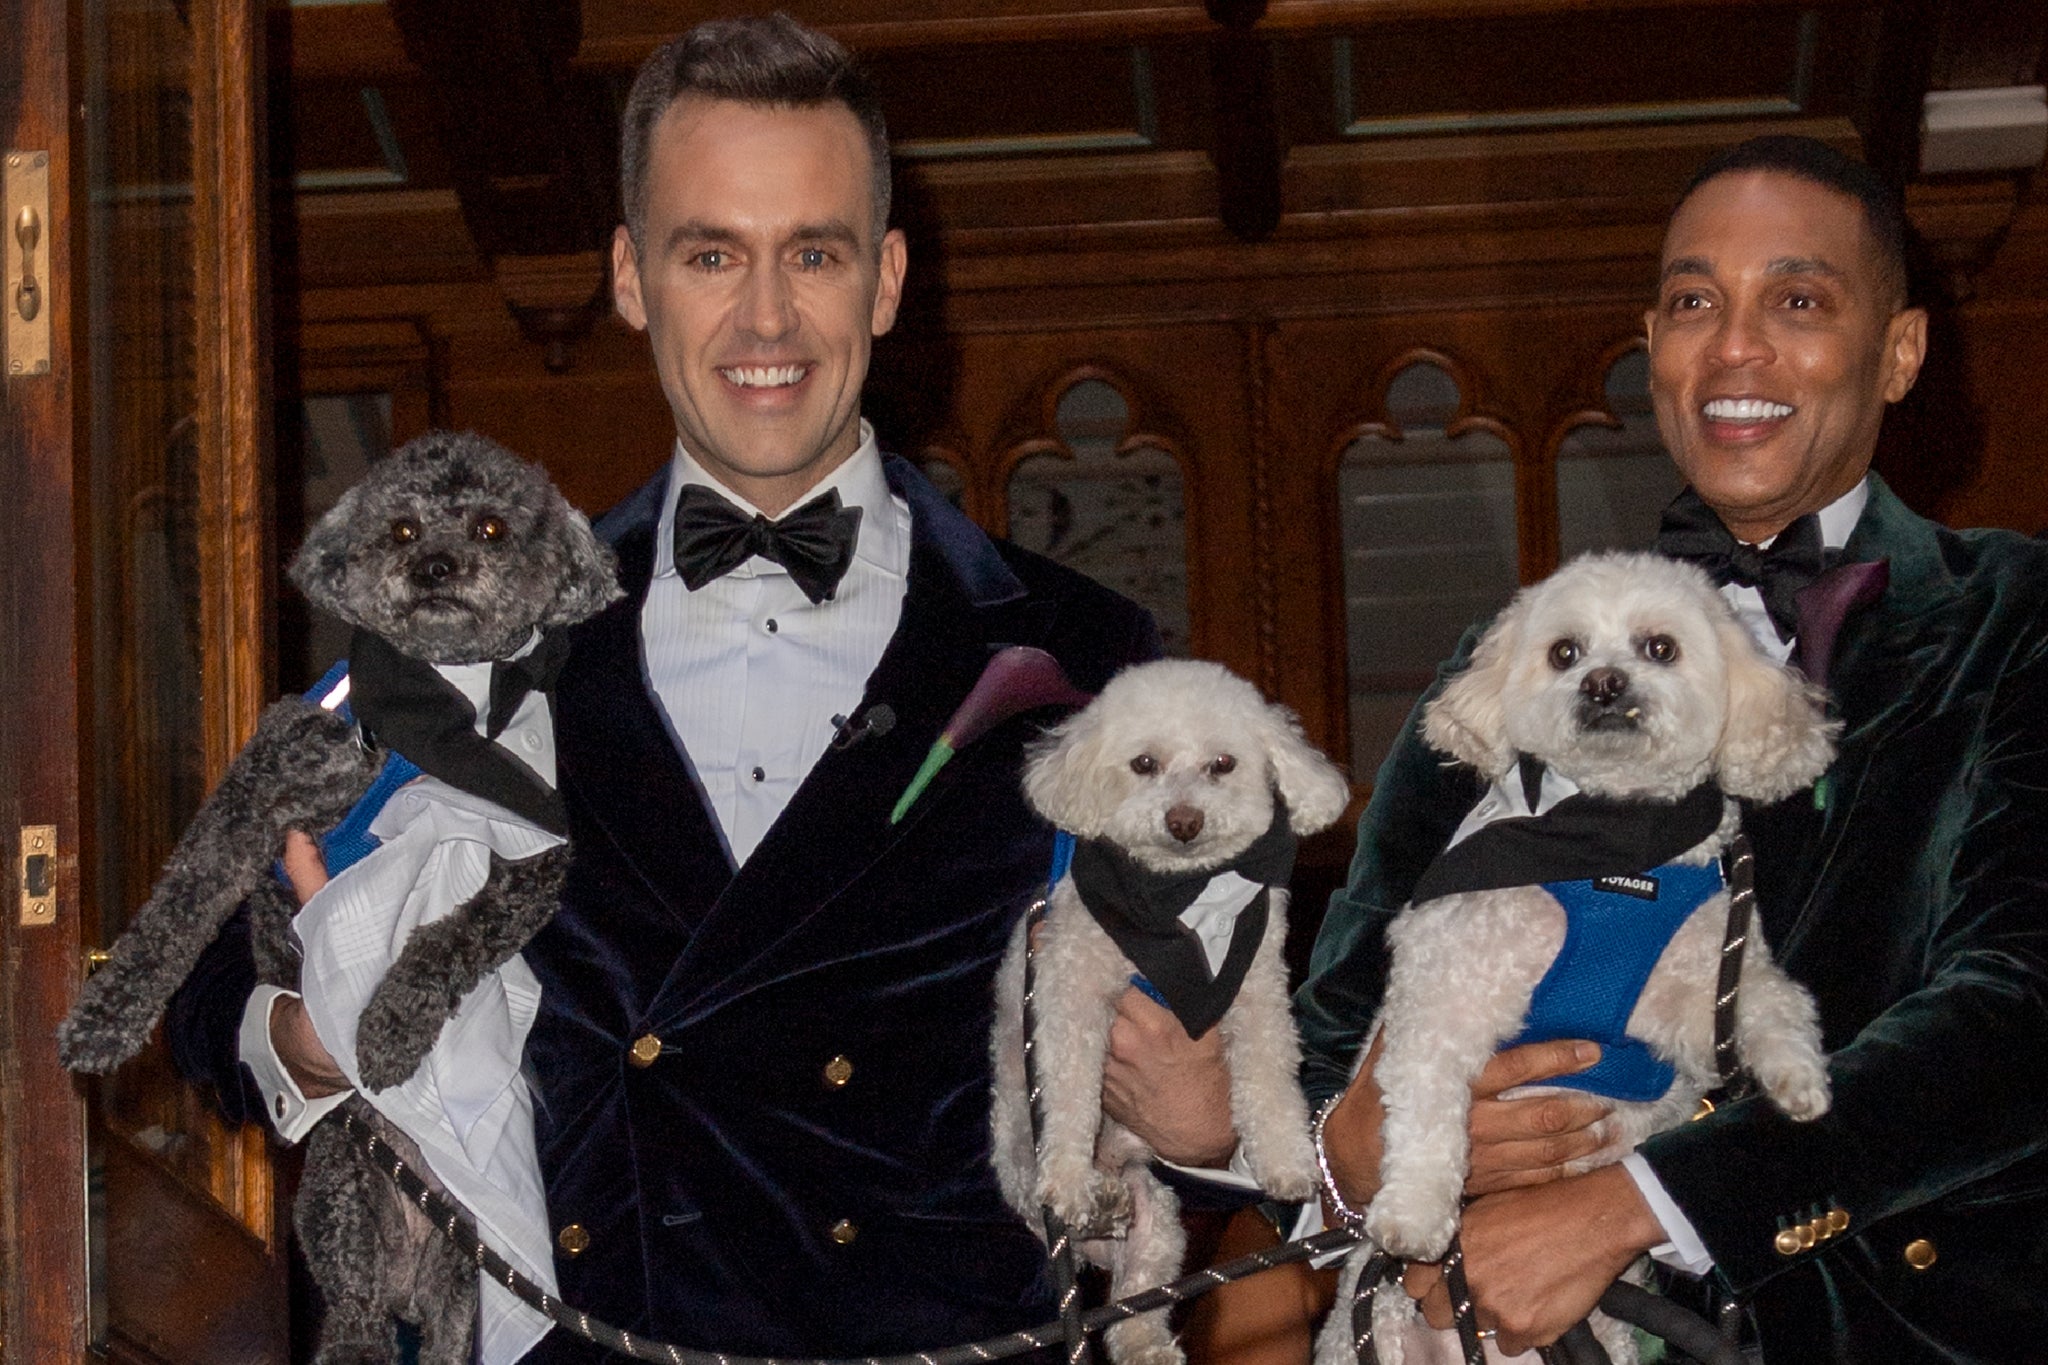 Don Lemon and Tim Malone holding their dogs as they exit the ceremony